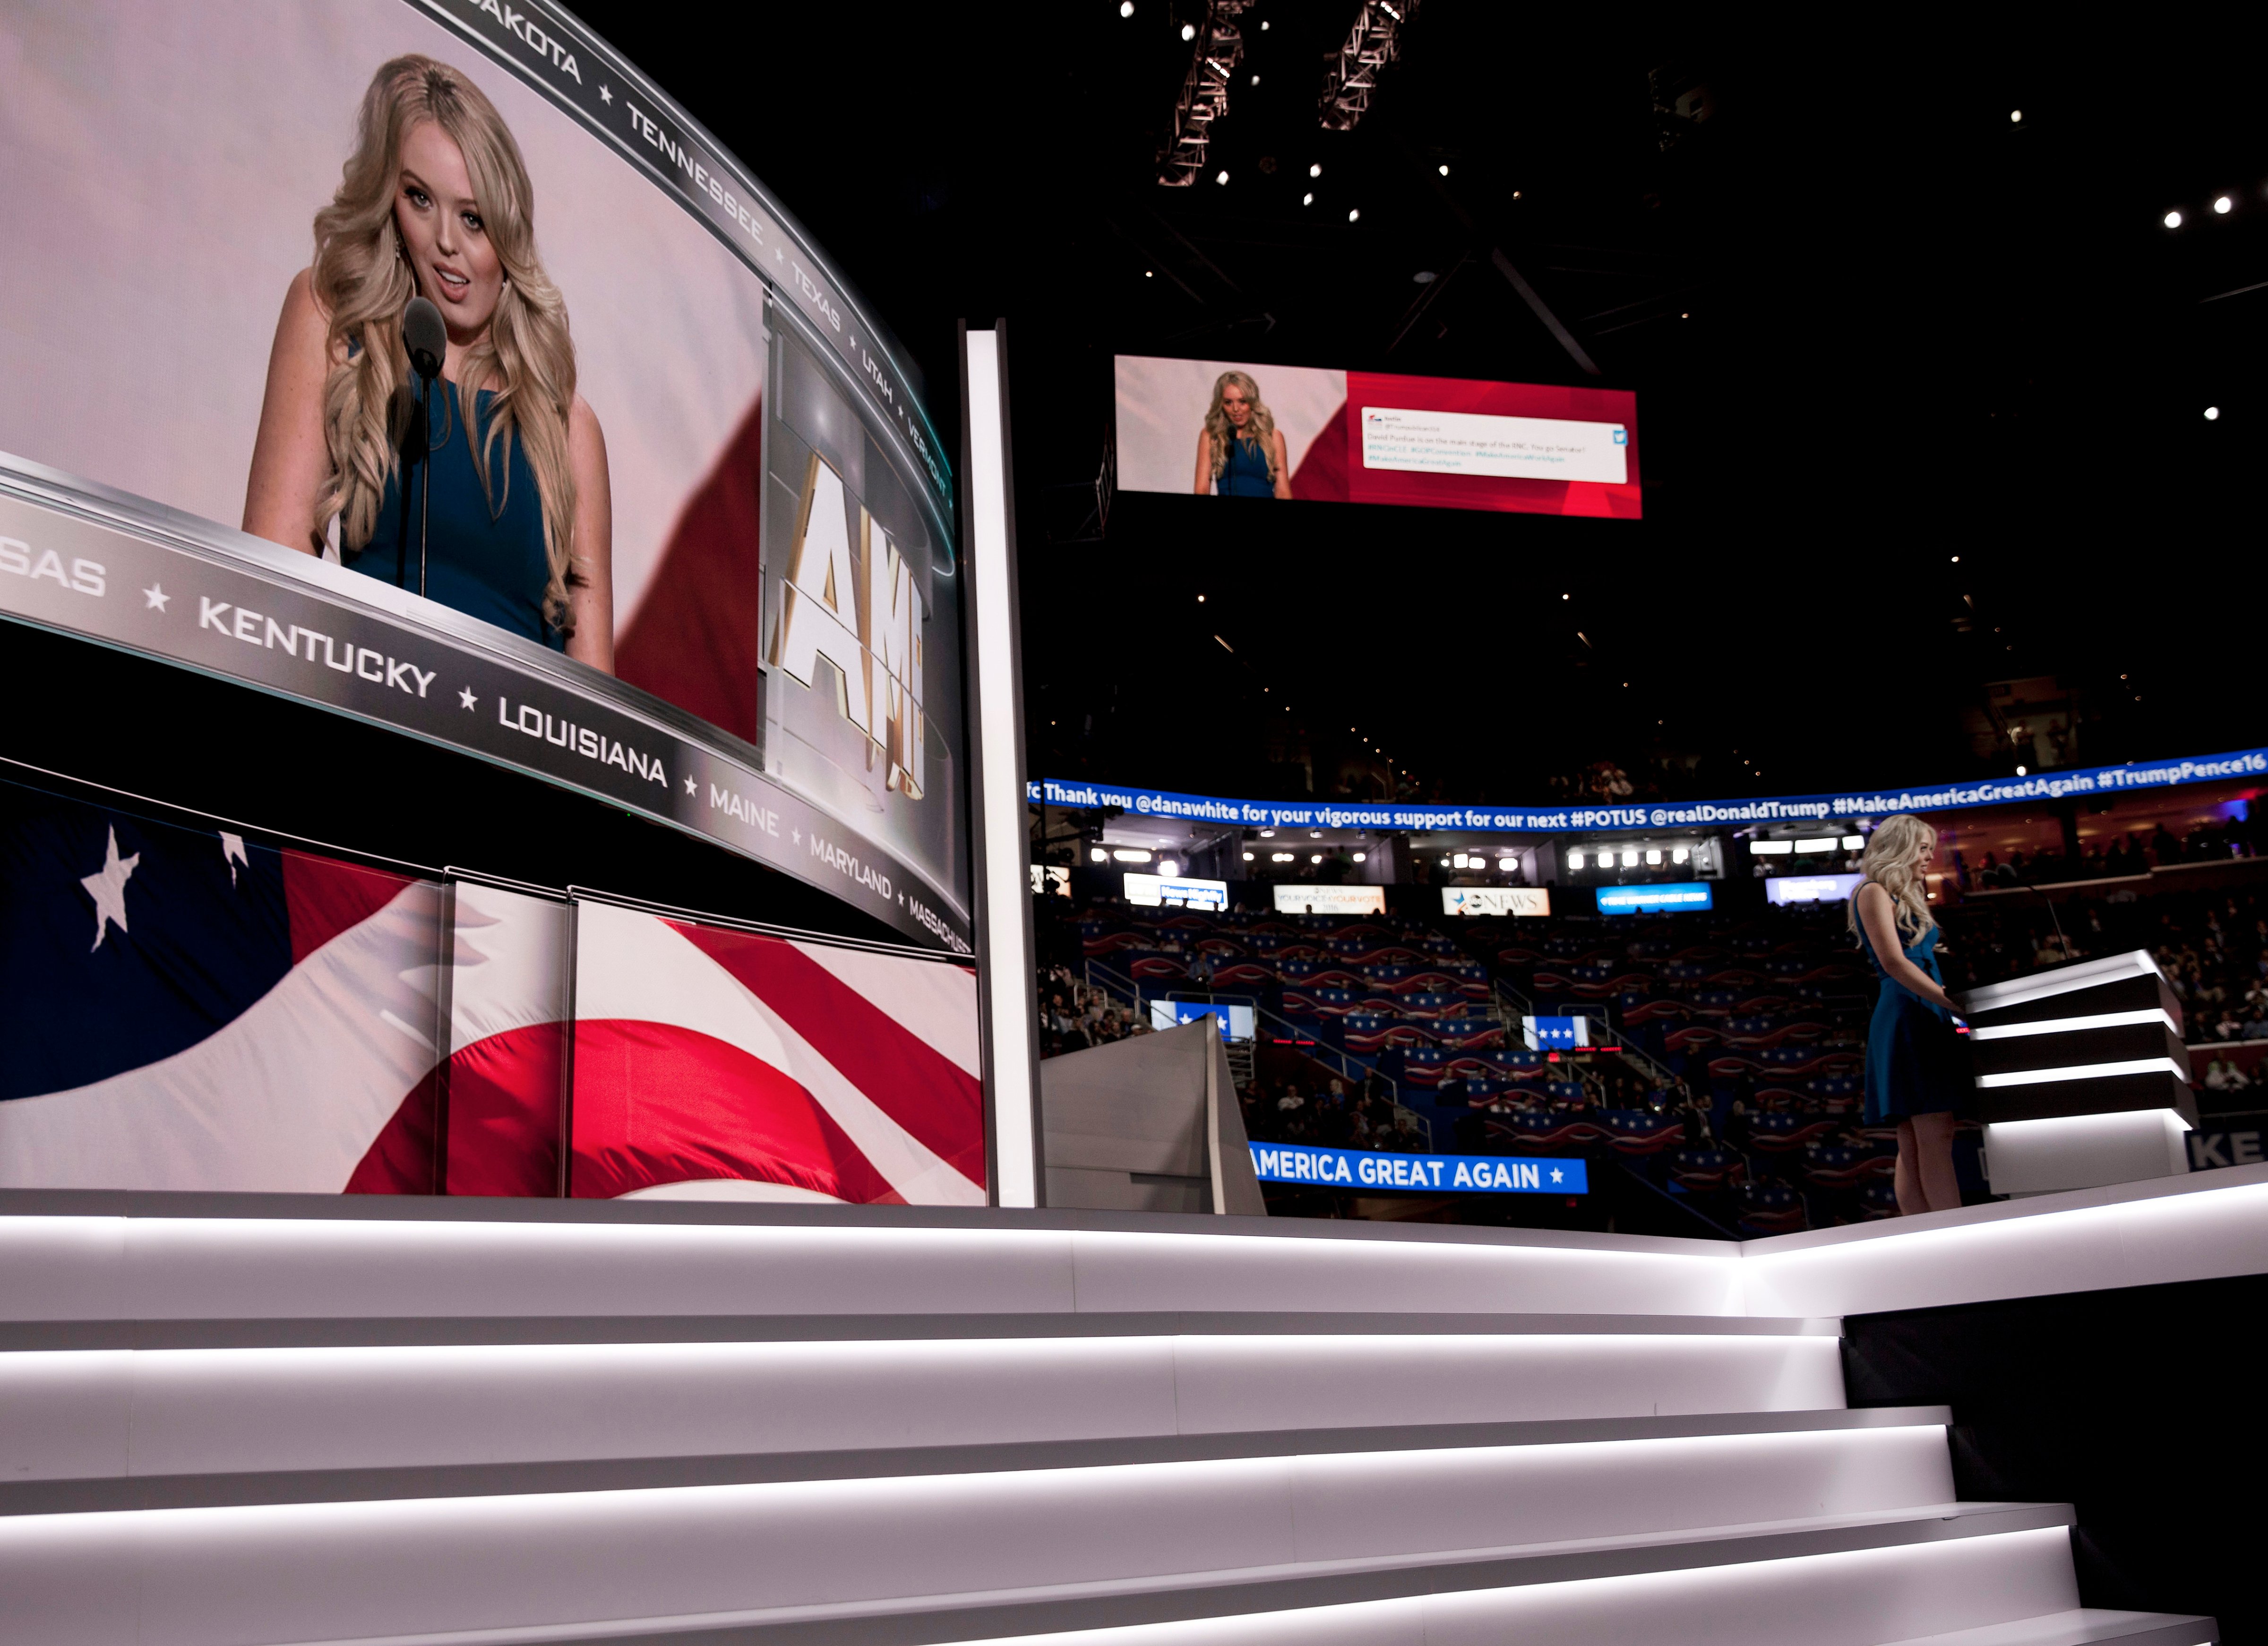 Tiffany Trump, daughter of Donald Trump, speaks at the 2016 Republican National Convention in Cleveland on July 19, 2016. (Christopher Morris—VII for TIME)